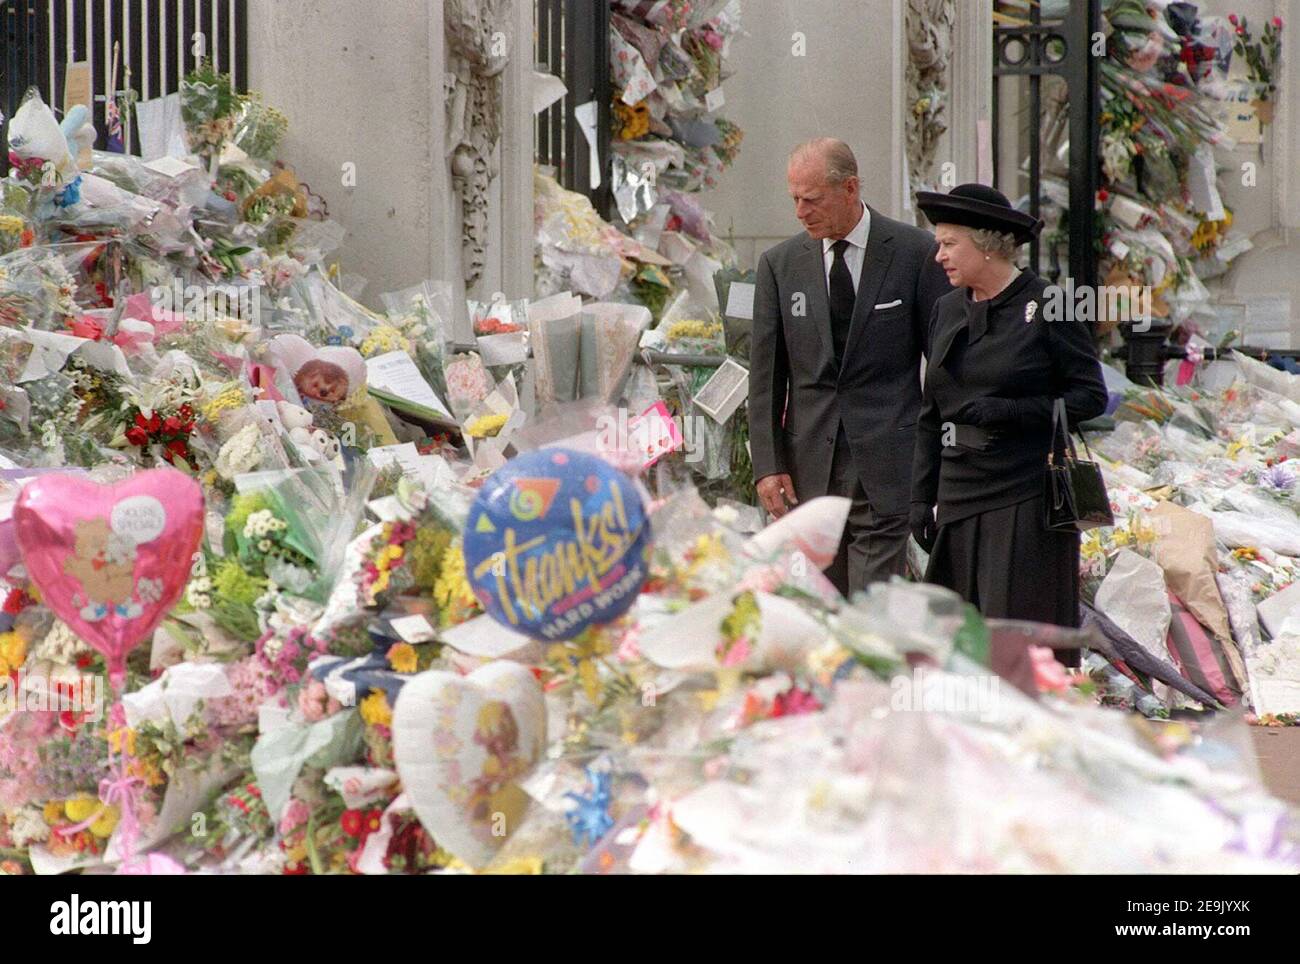 File photo dated 05/09/97 of the Queen and the Duke of Edinburgh viewing the floral tributes to Diana, Princess of Wales, at Buckingham Palace. The Queen will have reigned as monarch for 69 years on Saturday. Stock Photo